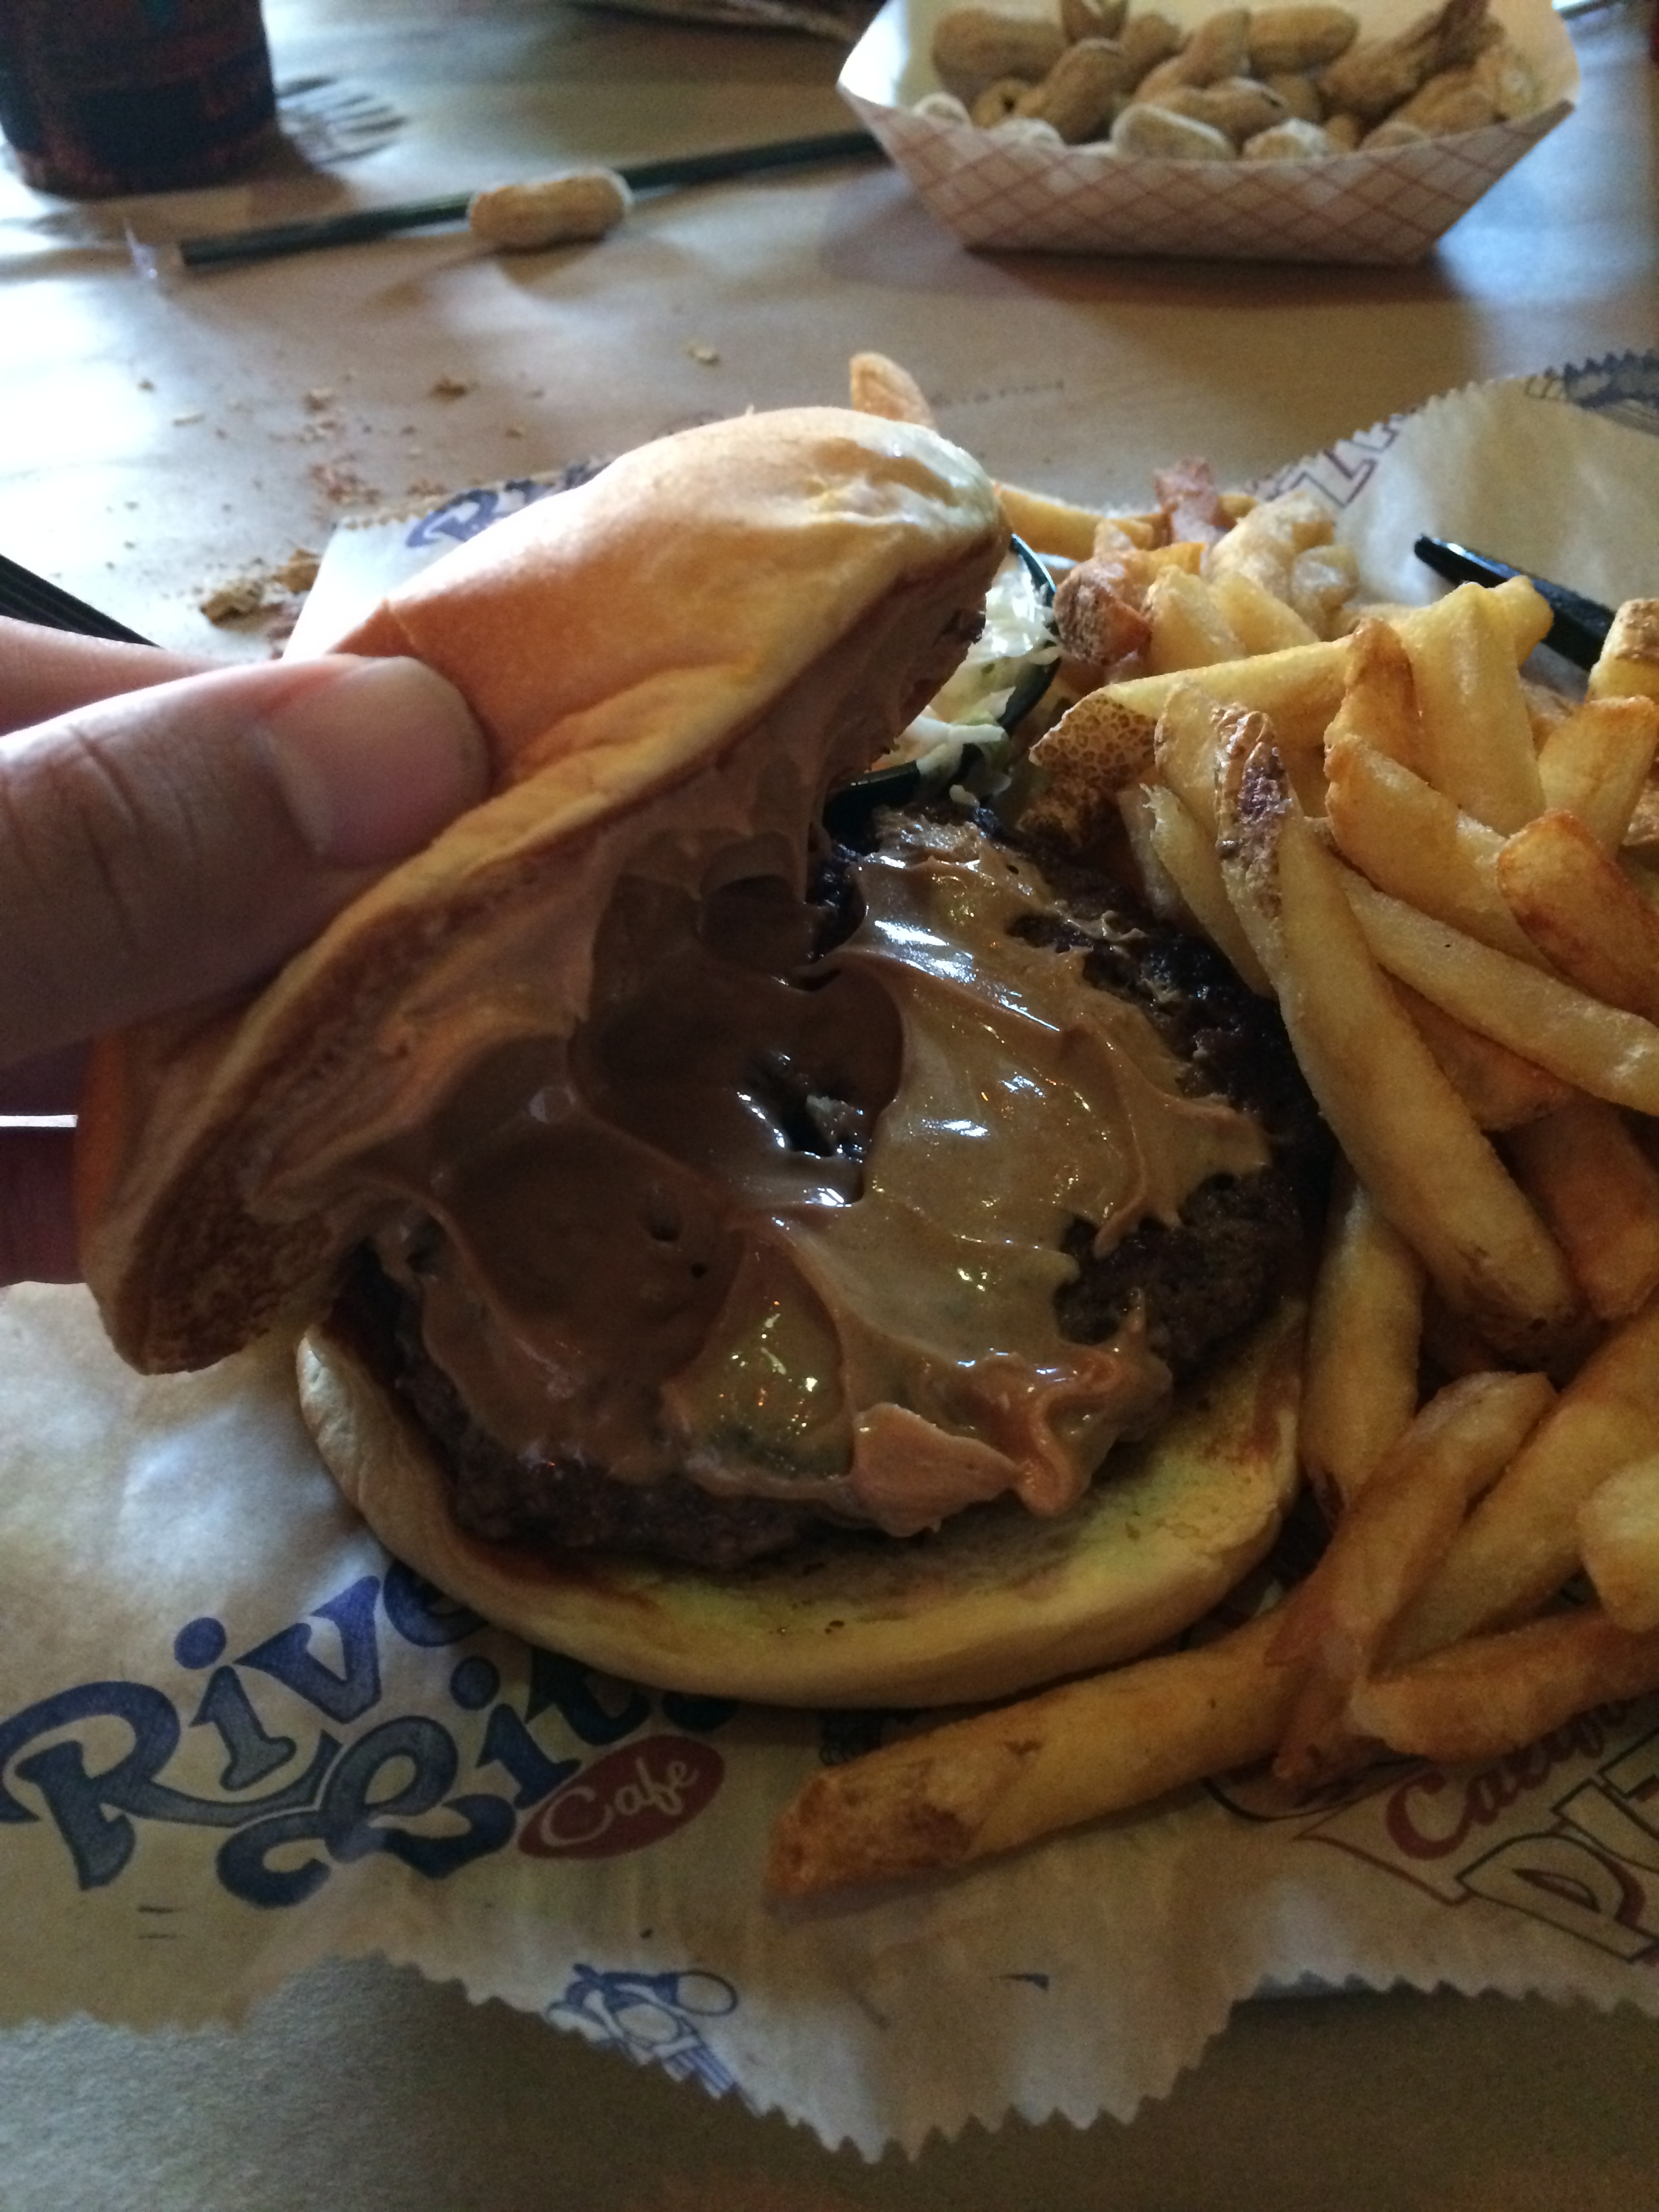 This is my peanut butter hamburger I ate at River City Café, a famous burger place in Myrtle Beach.